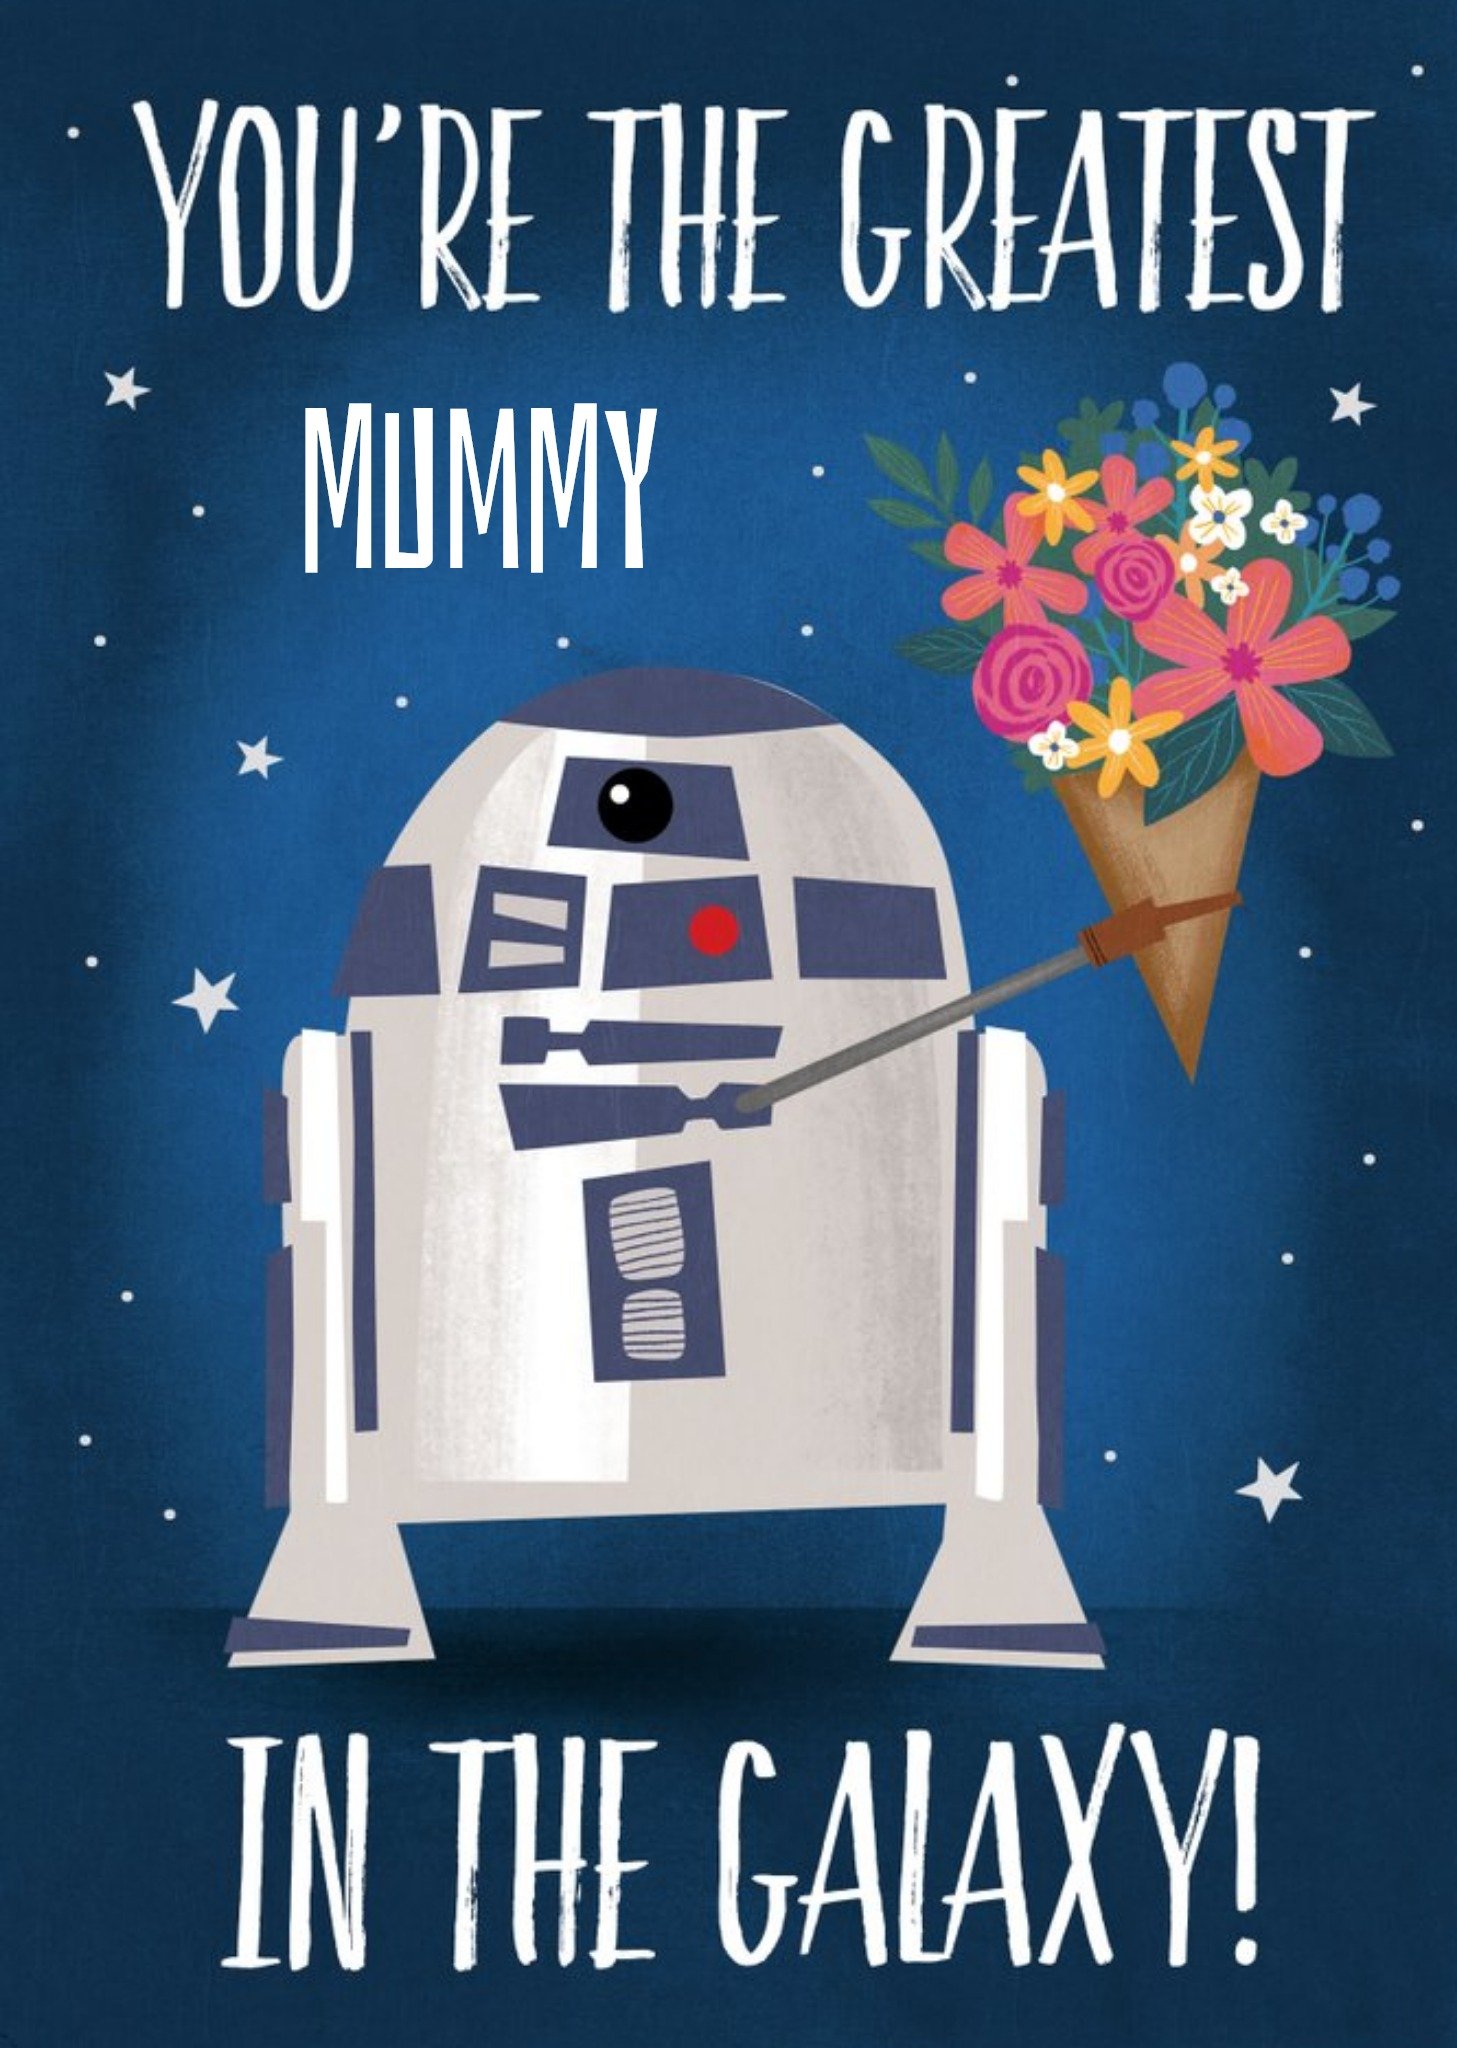 Disney Star Wars You're The Greatest Mummy In The Galaxy Mother's Day Card Ecard